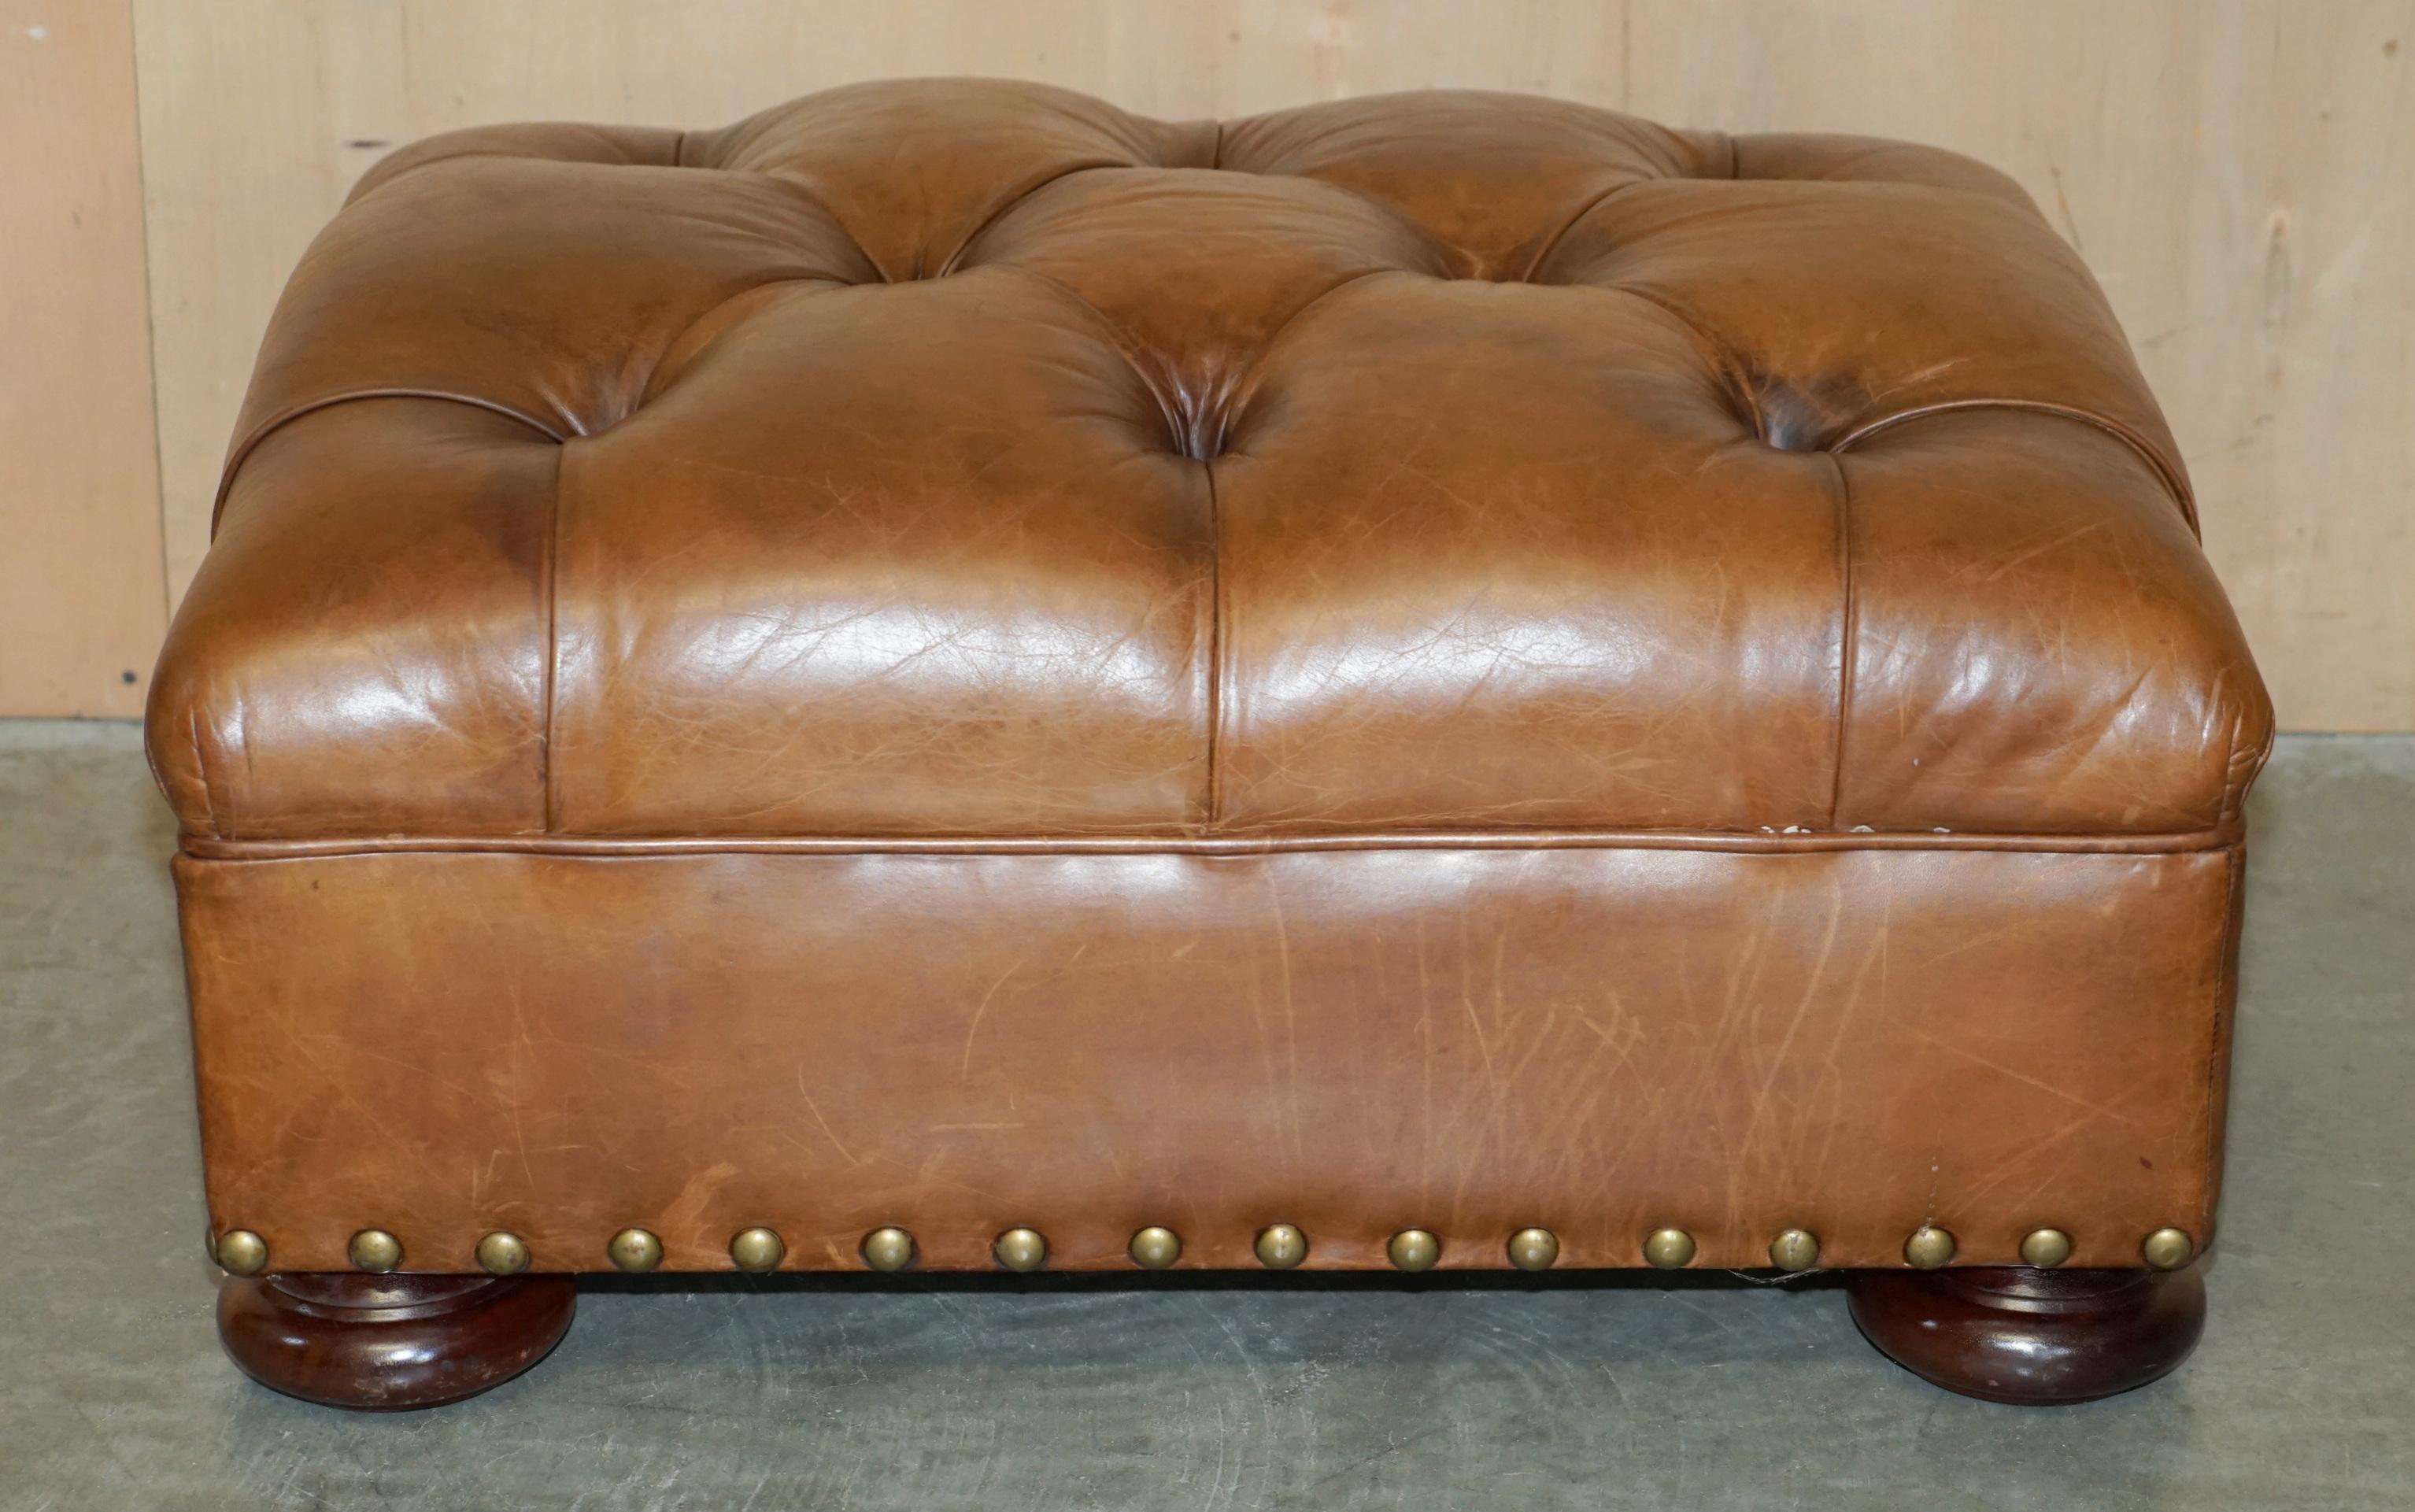 RALPH LAUREN WRITER'S CHESTERFIELD FOOTSTOOL OTTOMAN IN HERiTAGE BROWN LEATHER For Sale 9